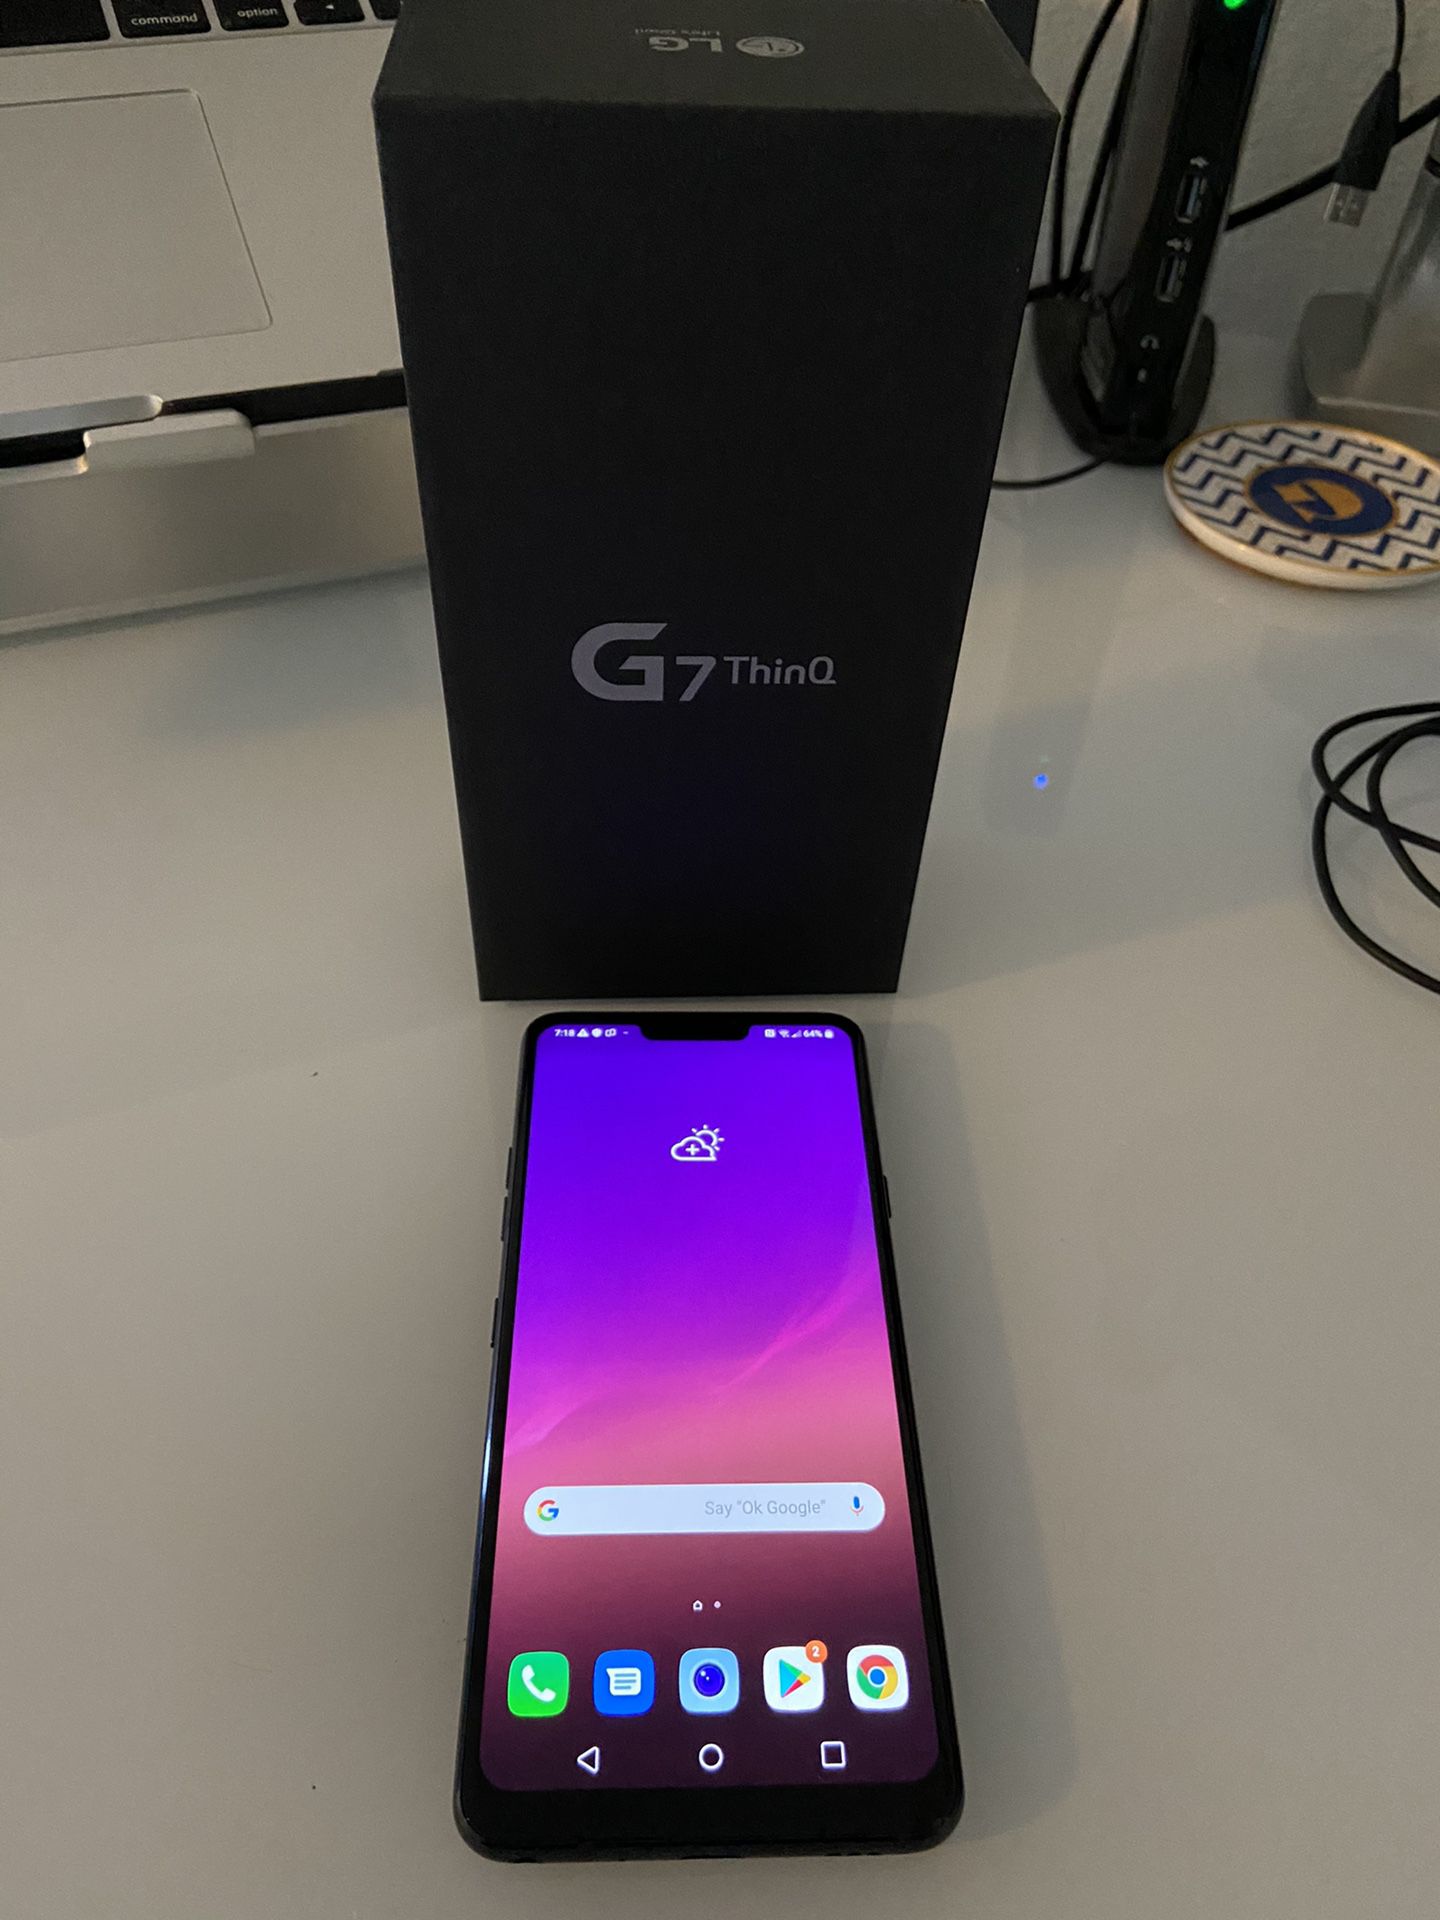 LG G7 ThinQ 64GB w/charger. unlocked any carrier